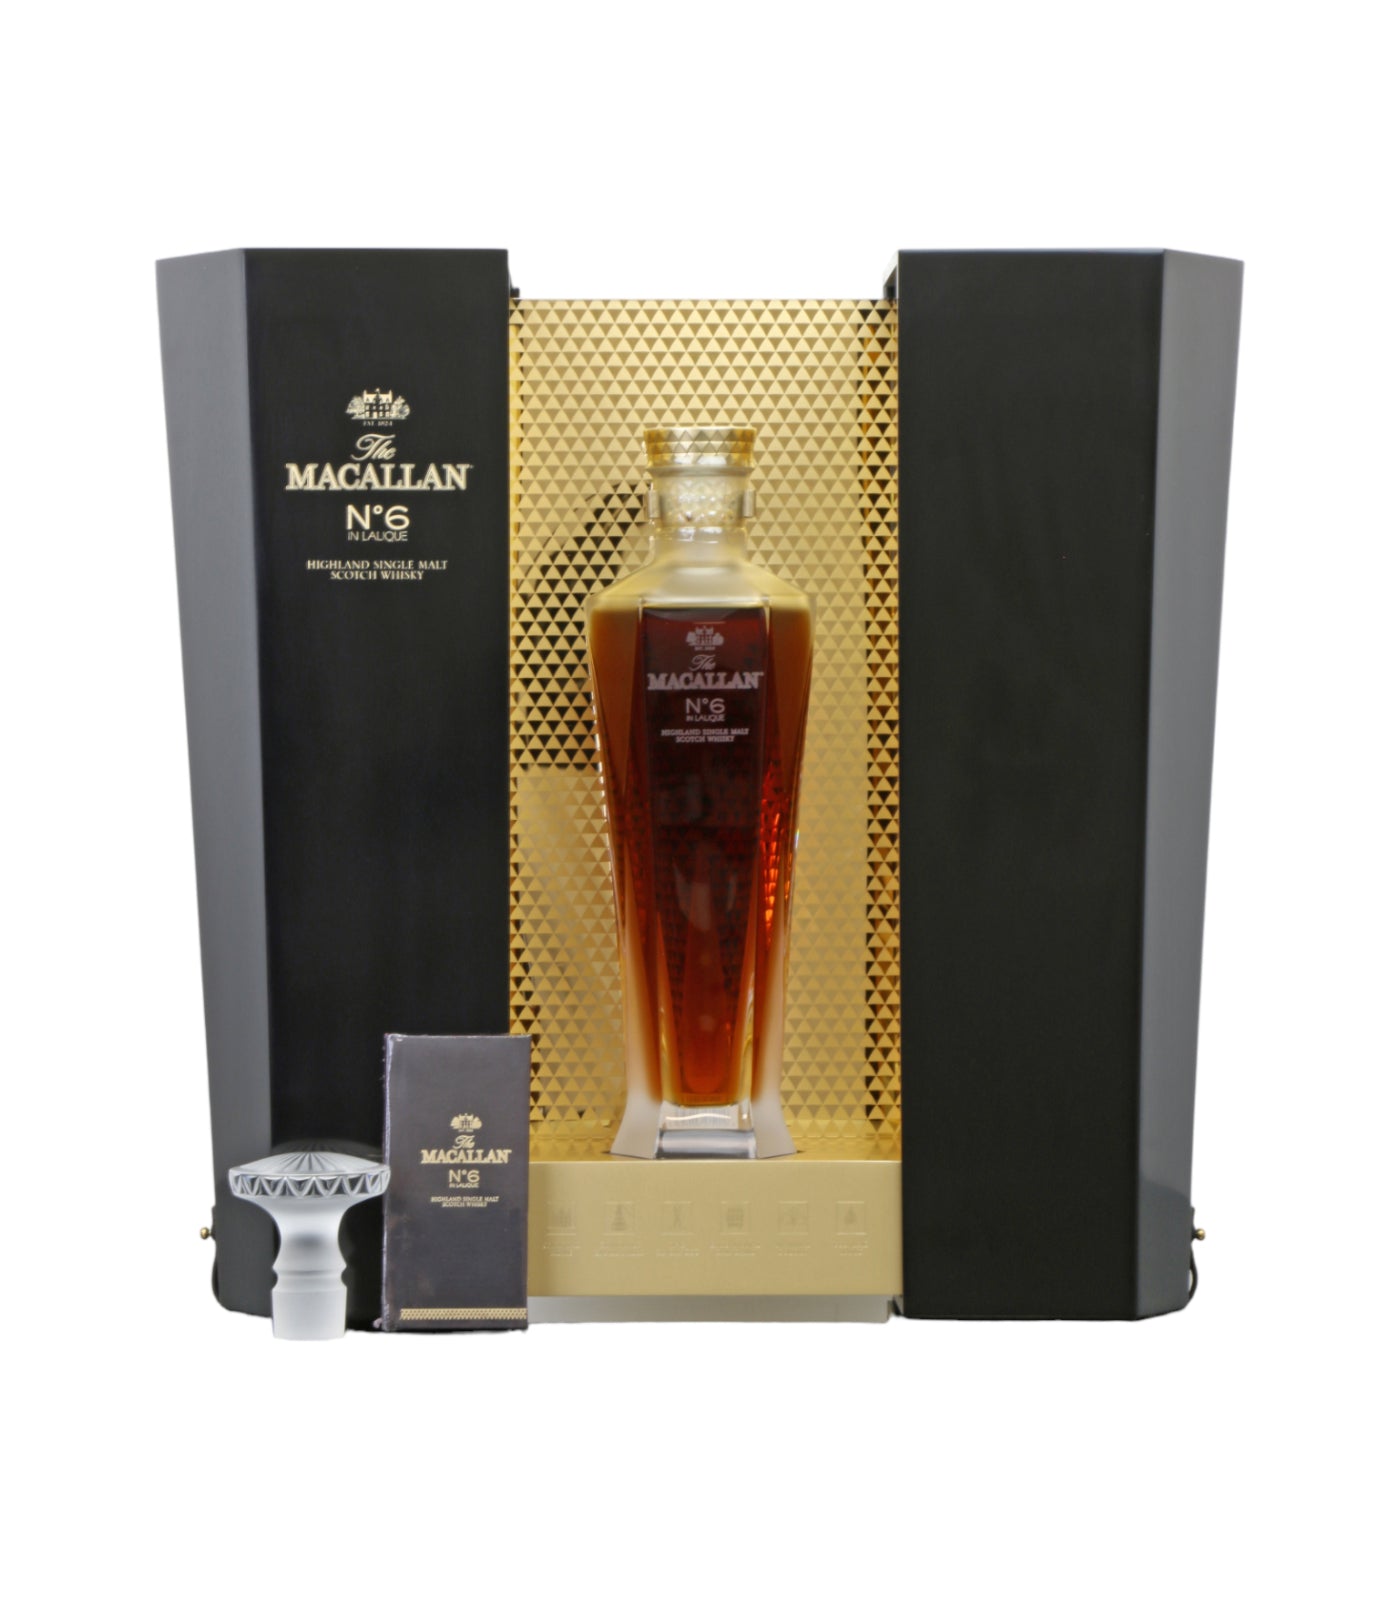 The Macallan No.6 in Lalique Whisky (75cl; 43%)